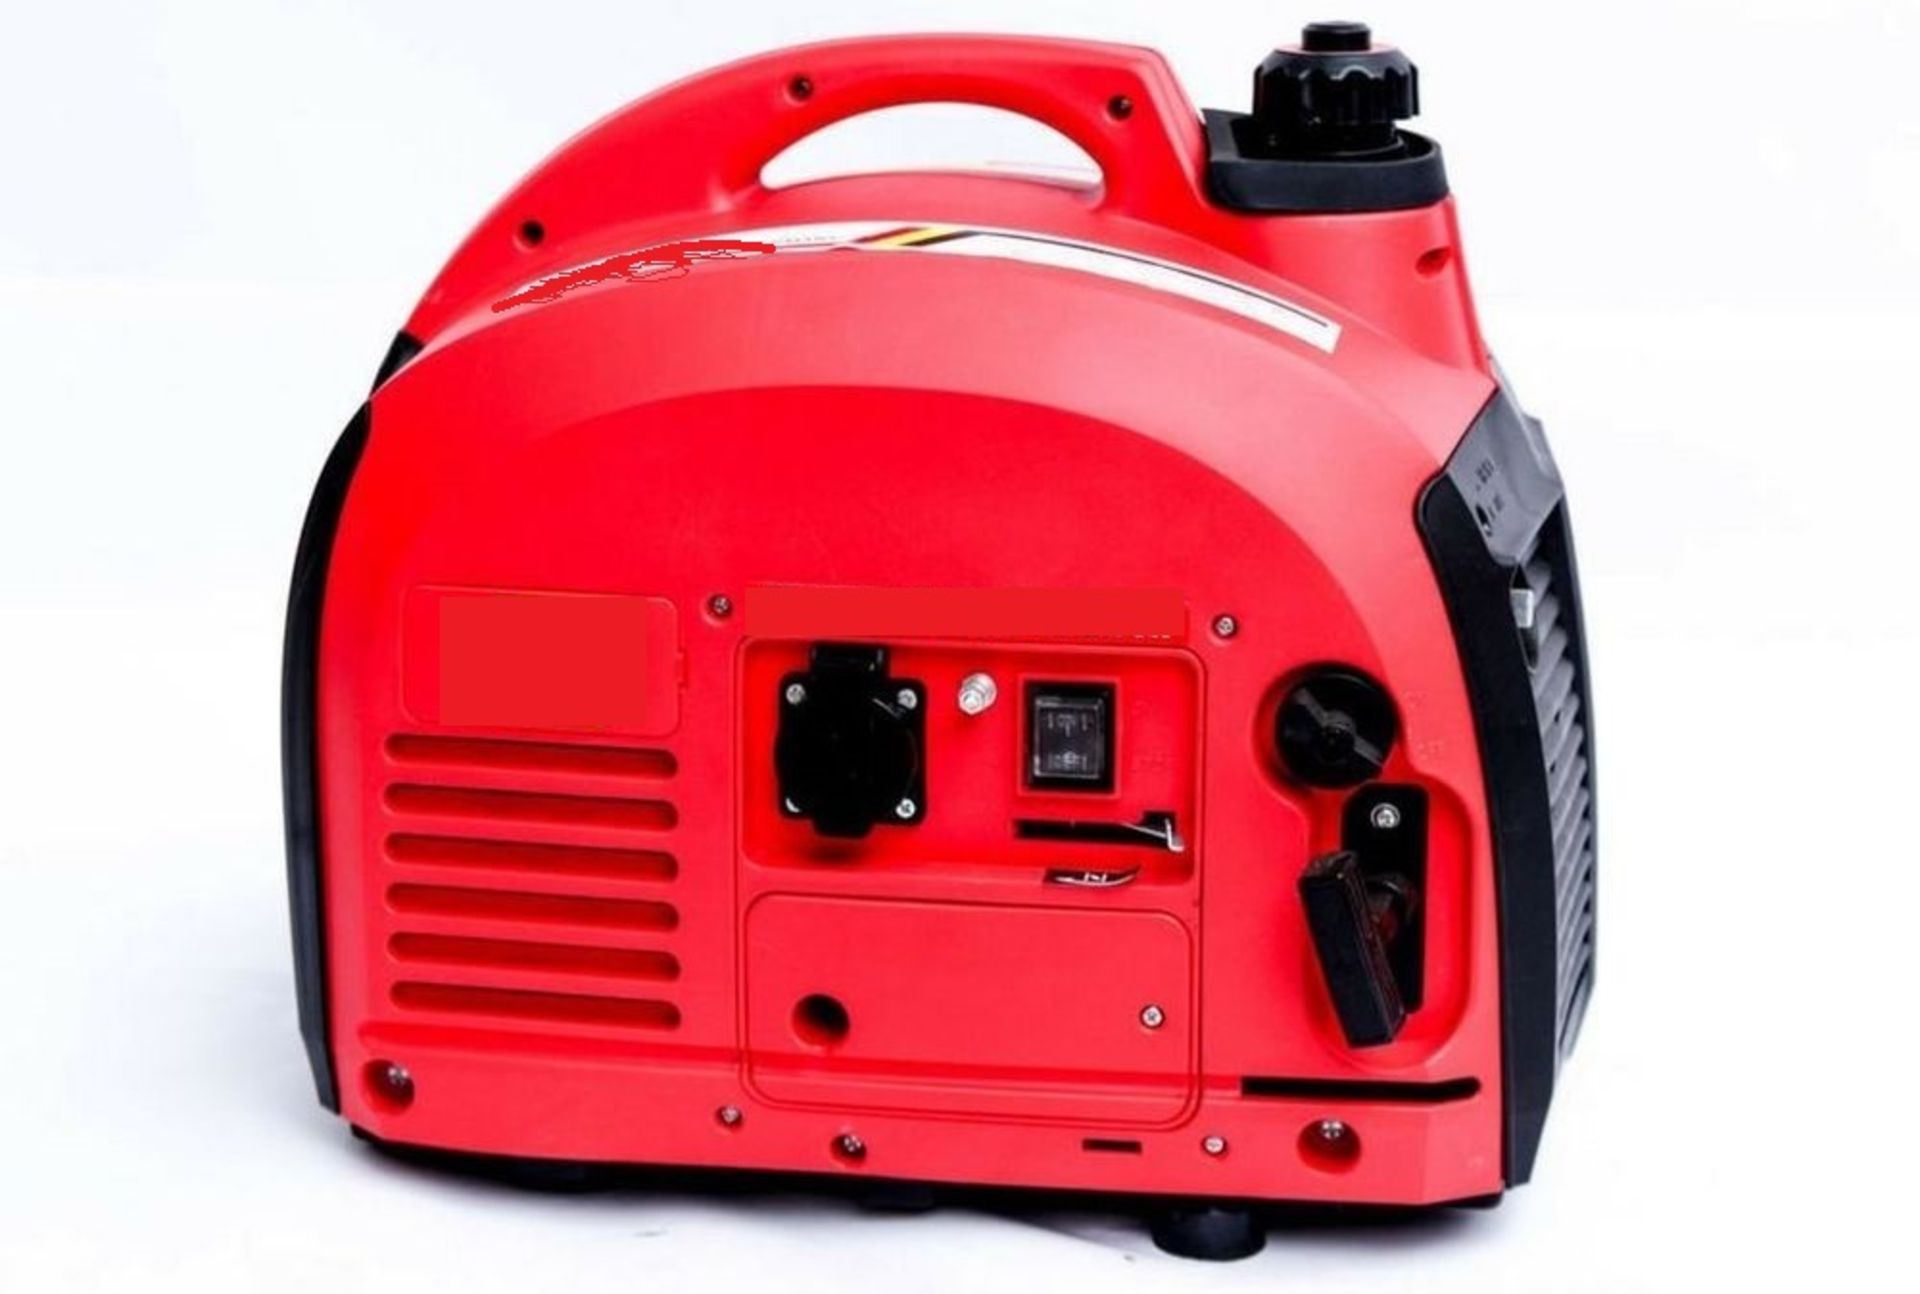 V Brand New Generator (Camping/Event Style) With Carry Handle 2000W Max Output 18KG £229.77 eBay